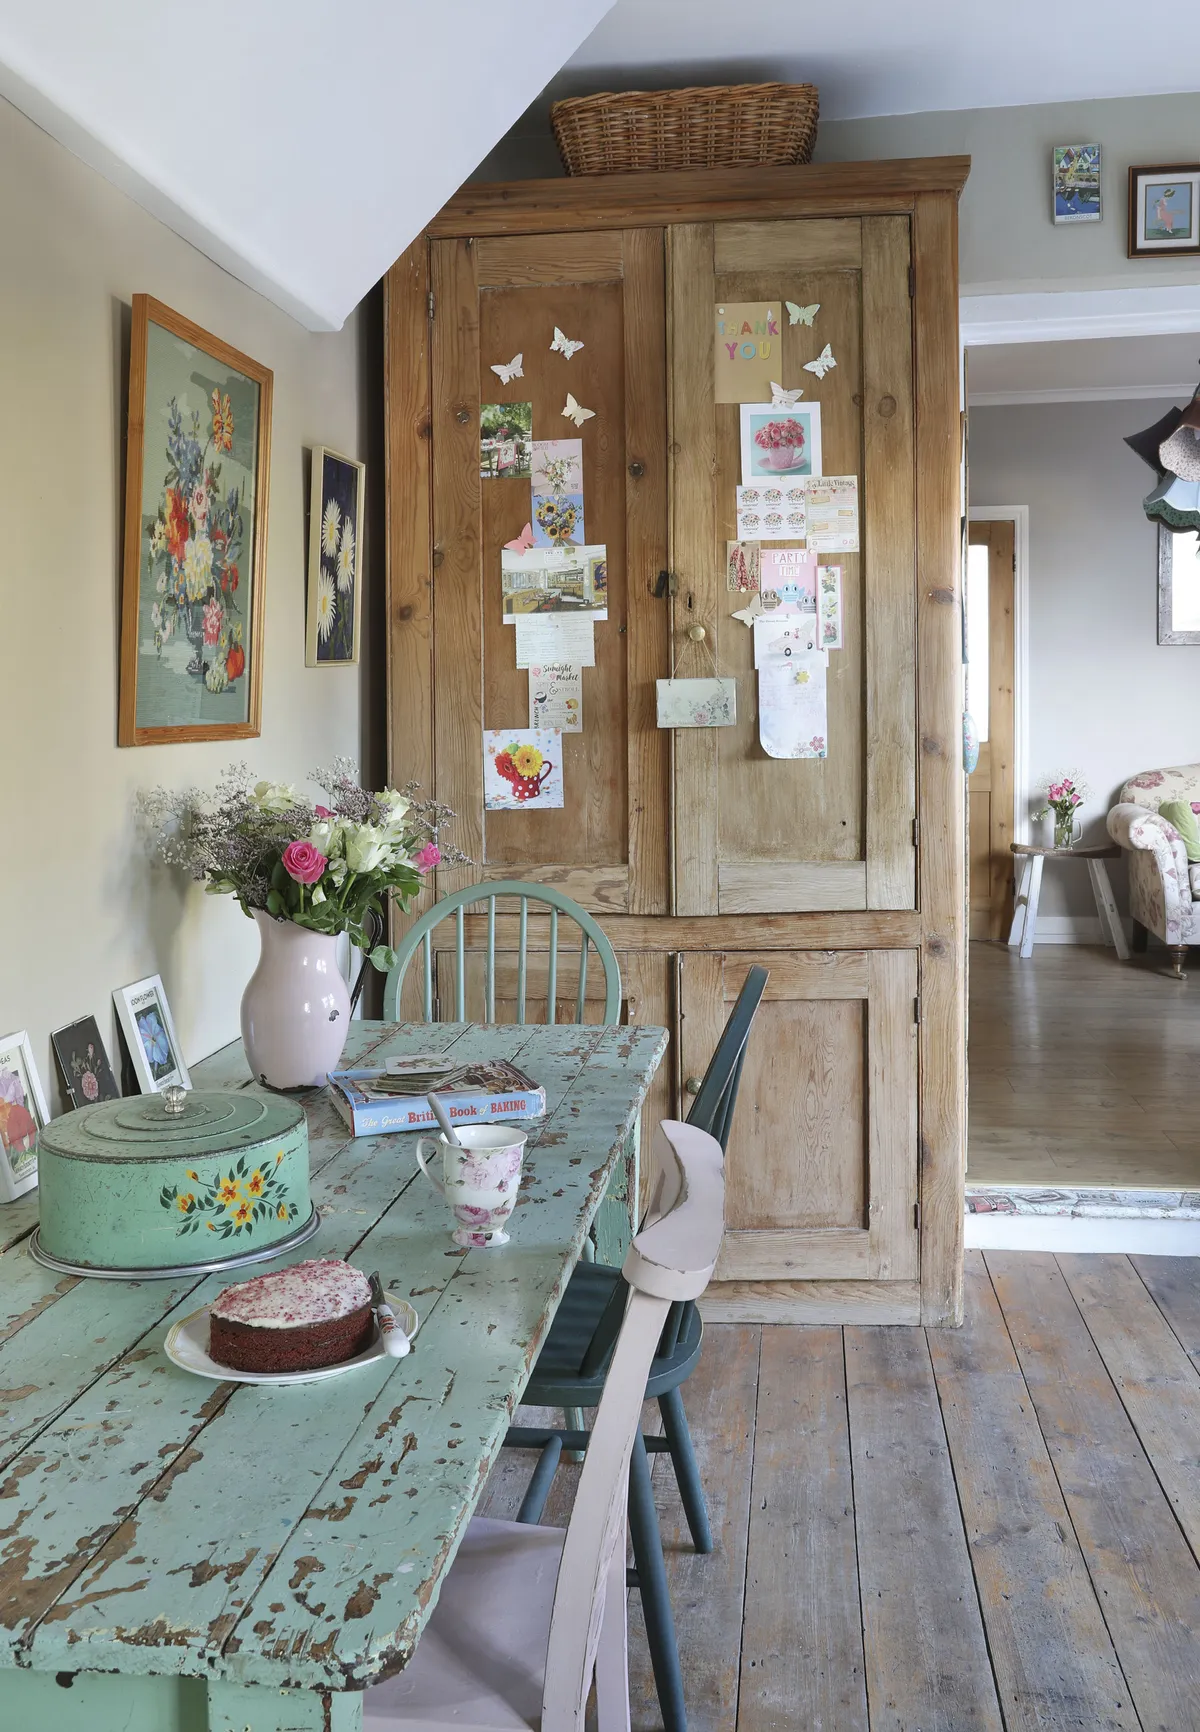 Hildah has created a welcoming dining area without breaking the bank by accessorising preloved furniture with cherished keepsakes. ‘I love the green cake tin, which I picked up from an antiques shop in Ohio, when I went to visit family,’ says Hildah. ‘The kitchen dresser came from a manor house. It was my best and biggest eBay buy – I had to arrange for it to be delivered and it nearly didn’t make it inside due to its massive size!’